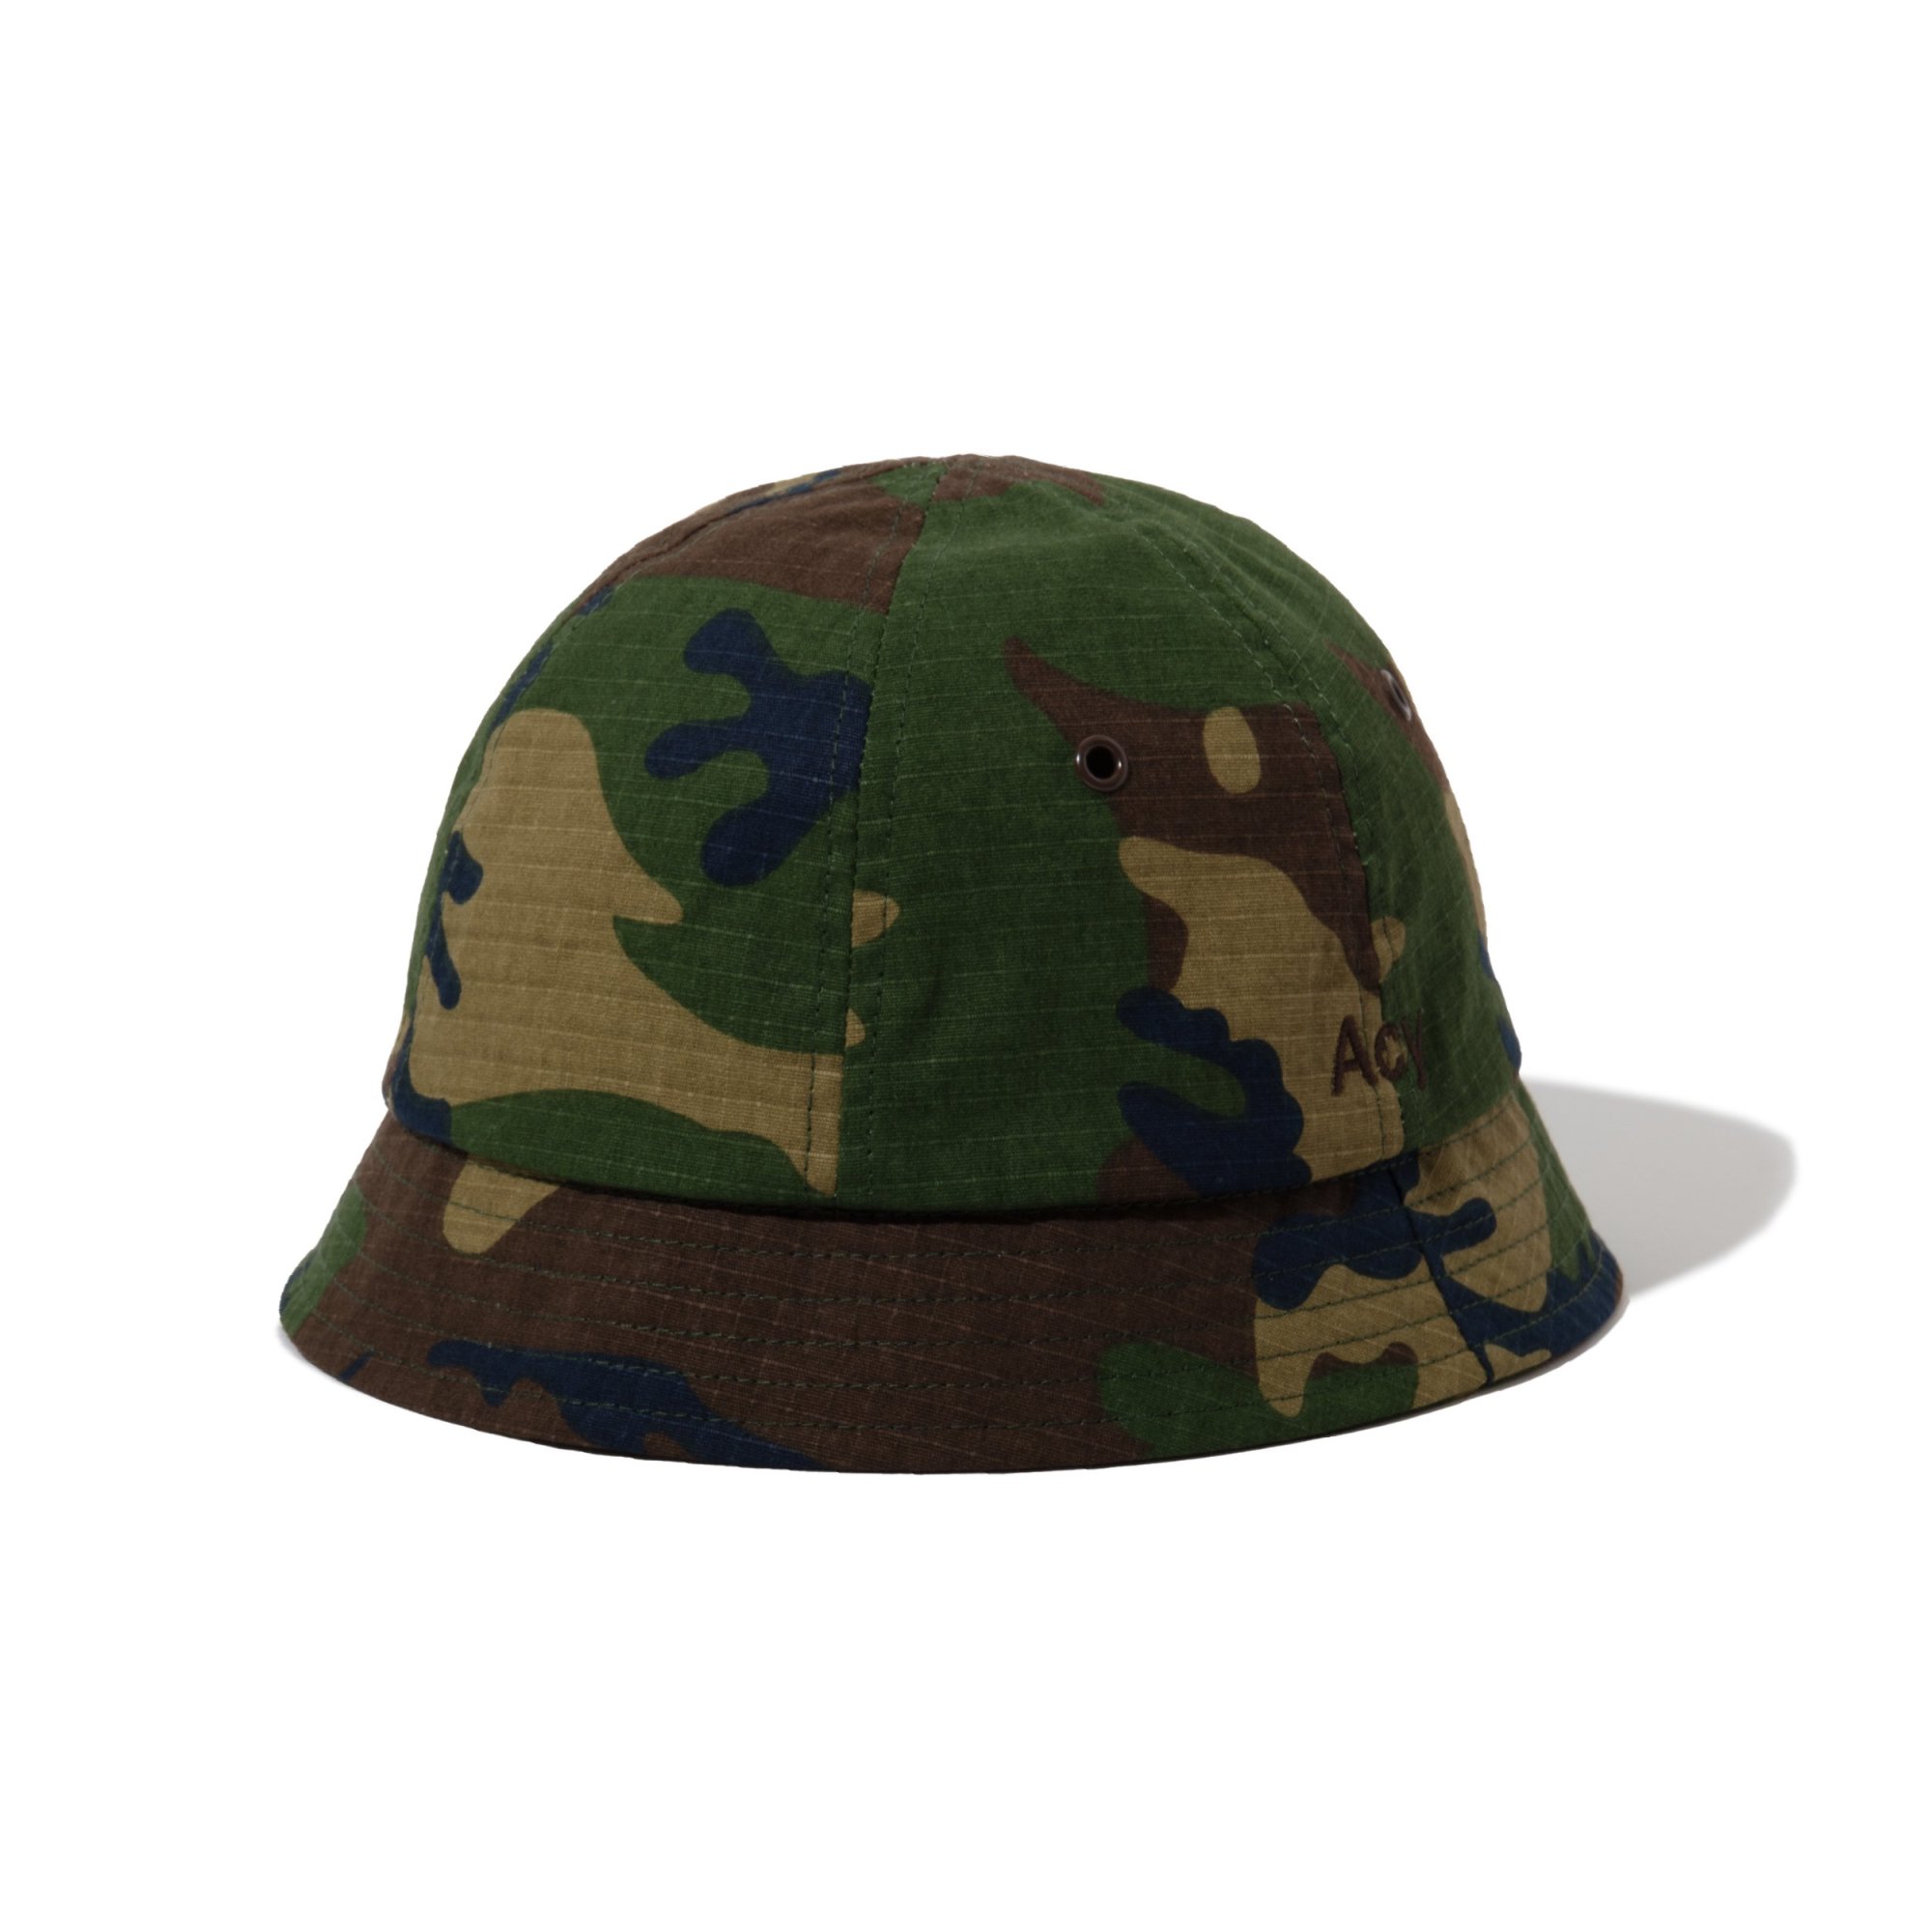 Acy<br>RS6PANEL HAT<br>